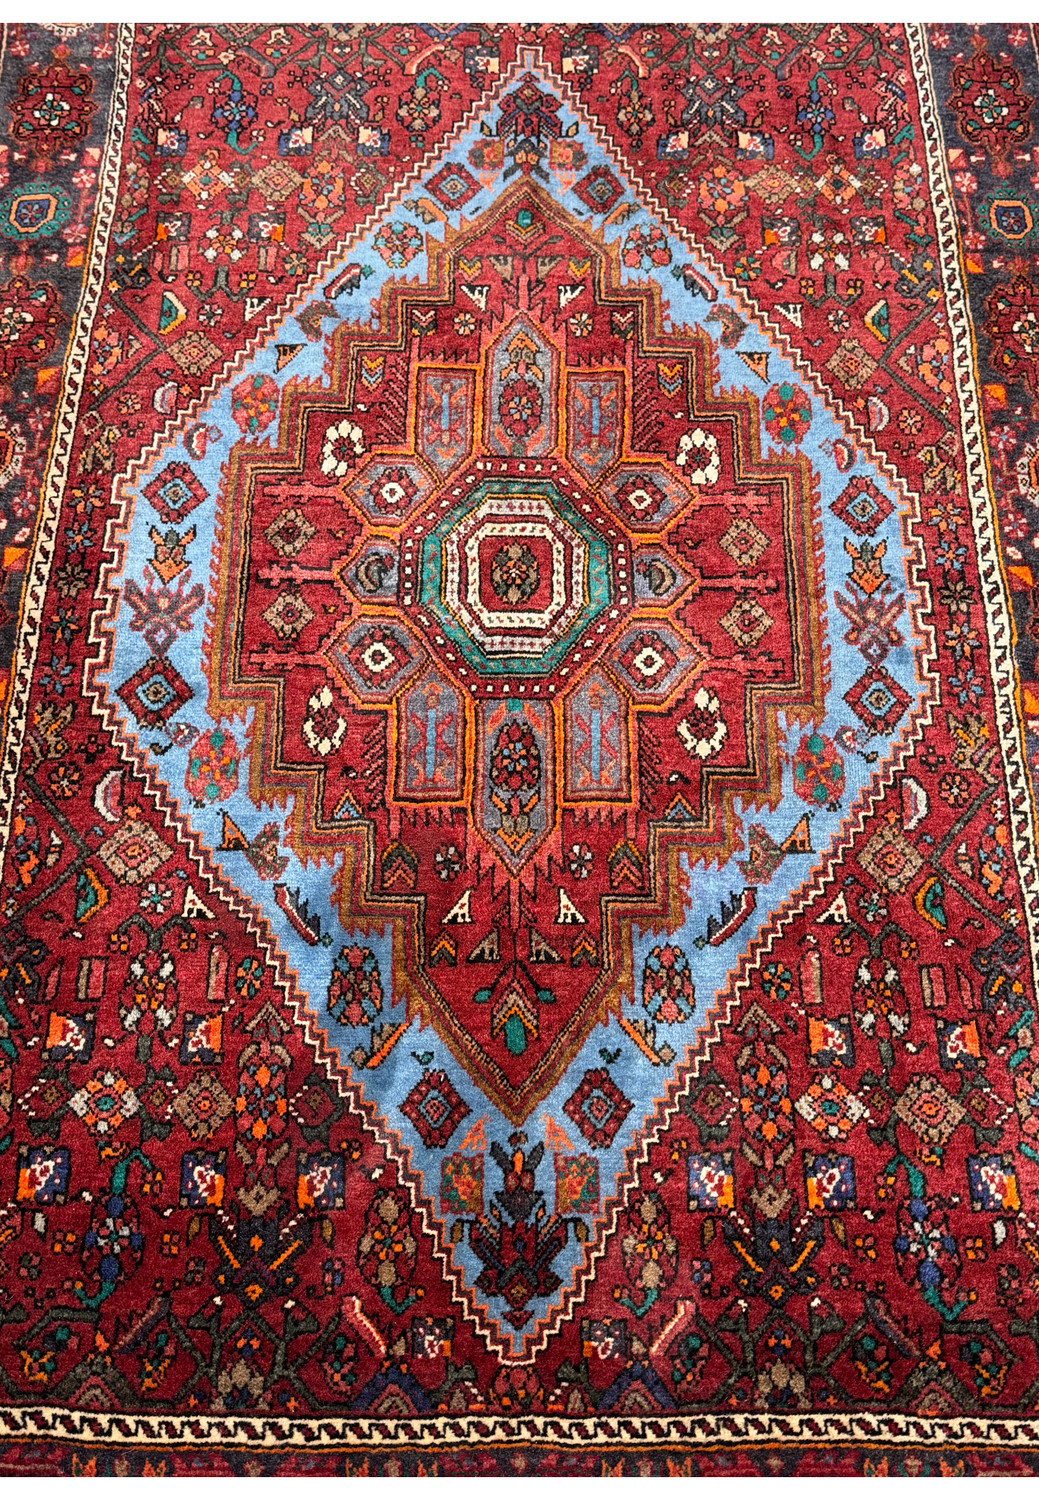 Close-up of the central diamond pattern on a Persian Gholtogh Rug highlighting the detailed craftsmanship and vibrant color contrasts.